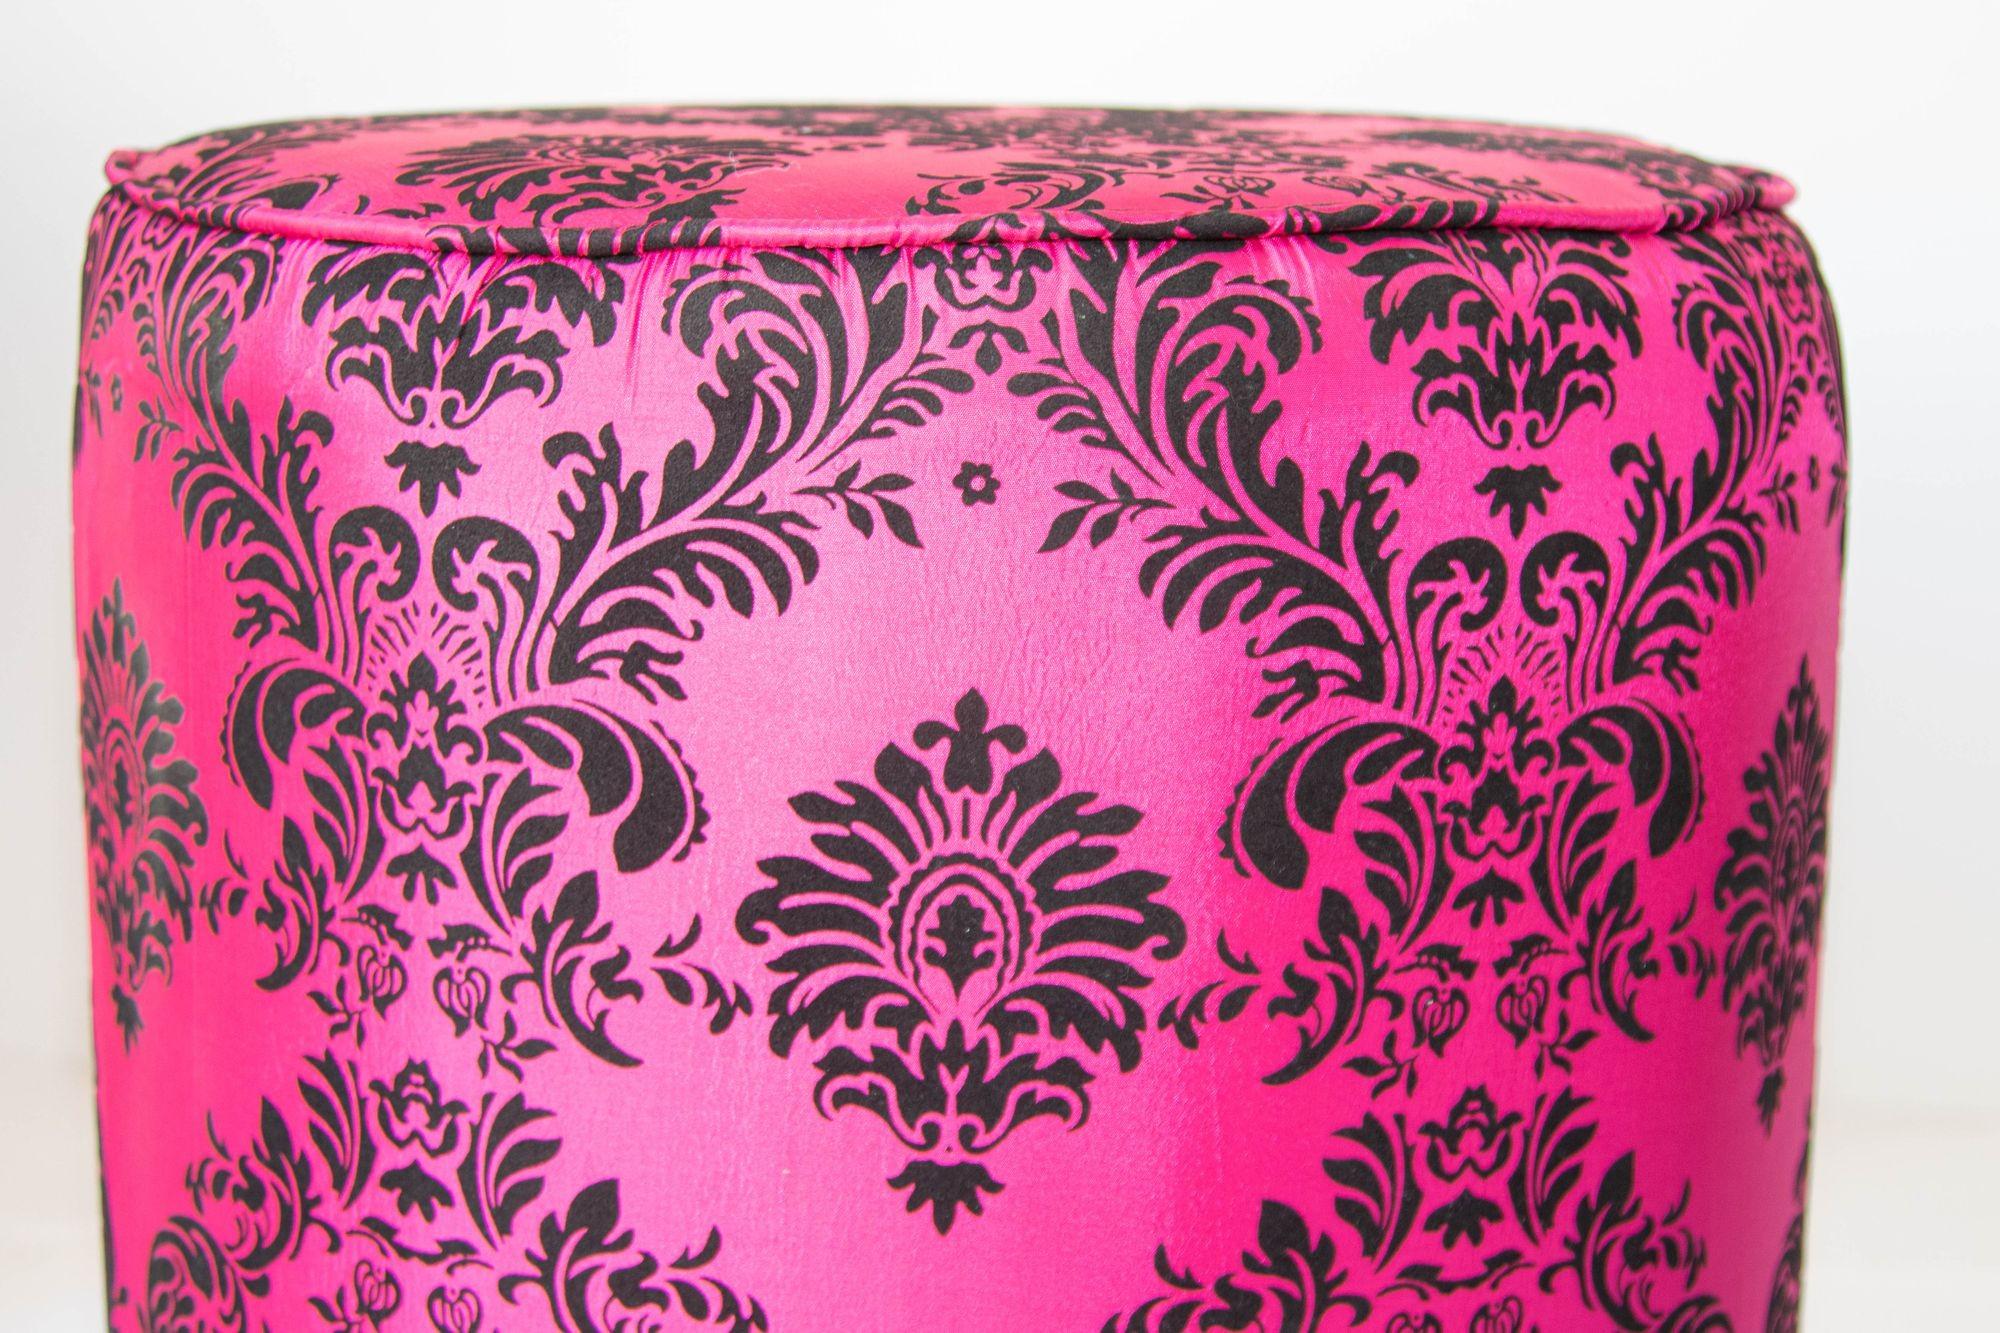 Vintage Fuchsia and Black Moroccan Round Upholstered Stools For Sale 2